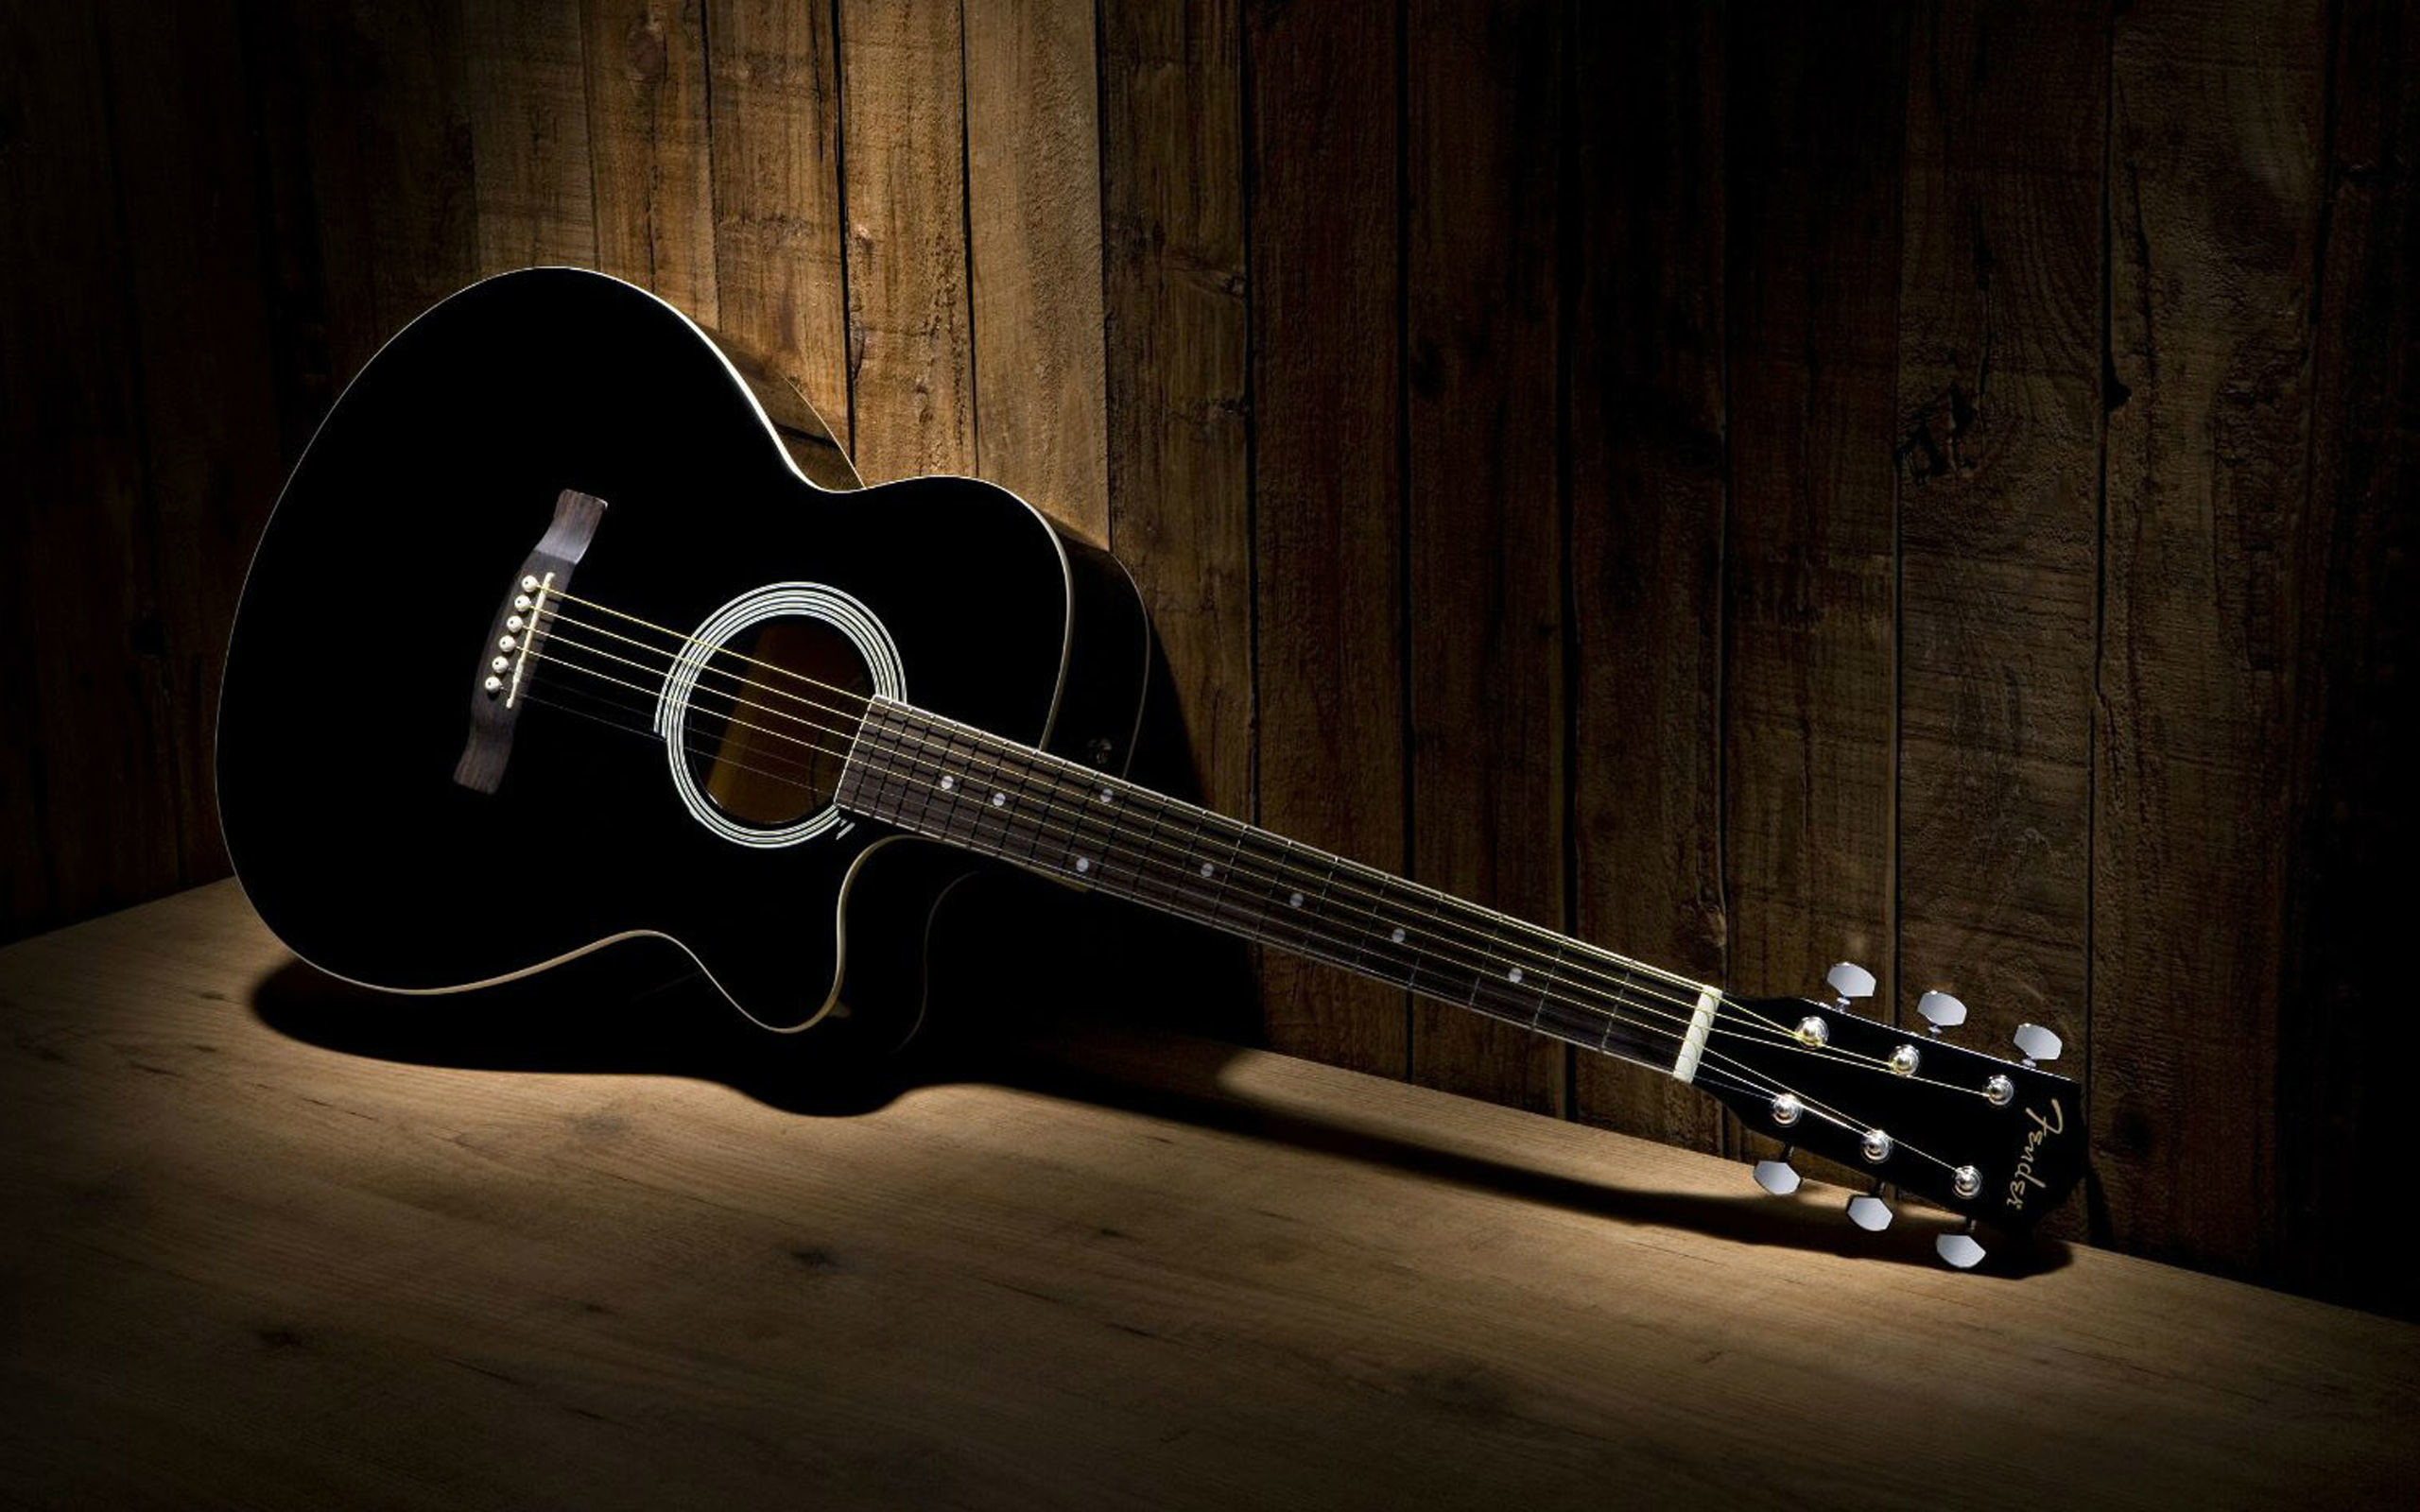 2560x1600 wallpaper.wiki-Musical-instrument-wallpapers-high-resolution-PIC-